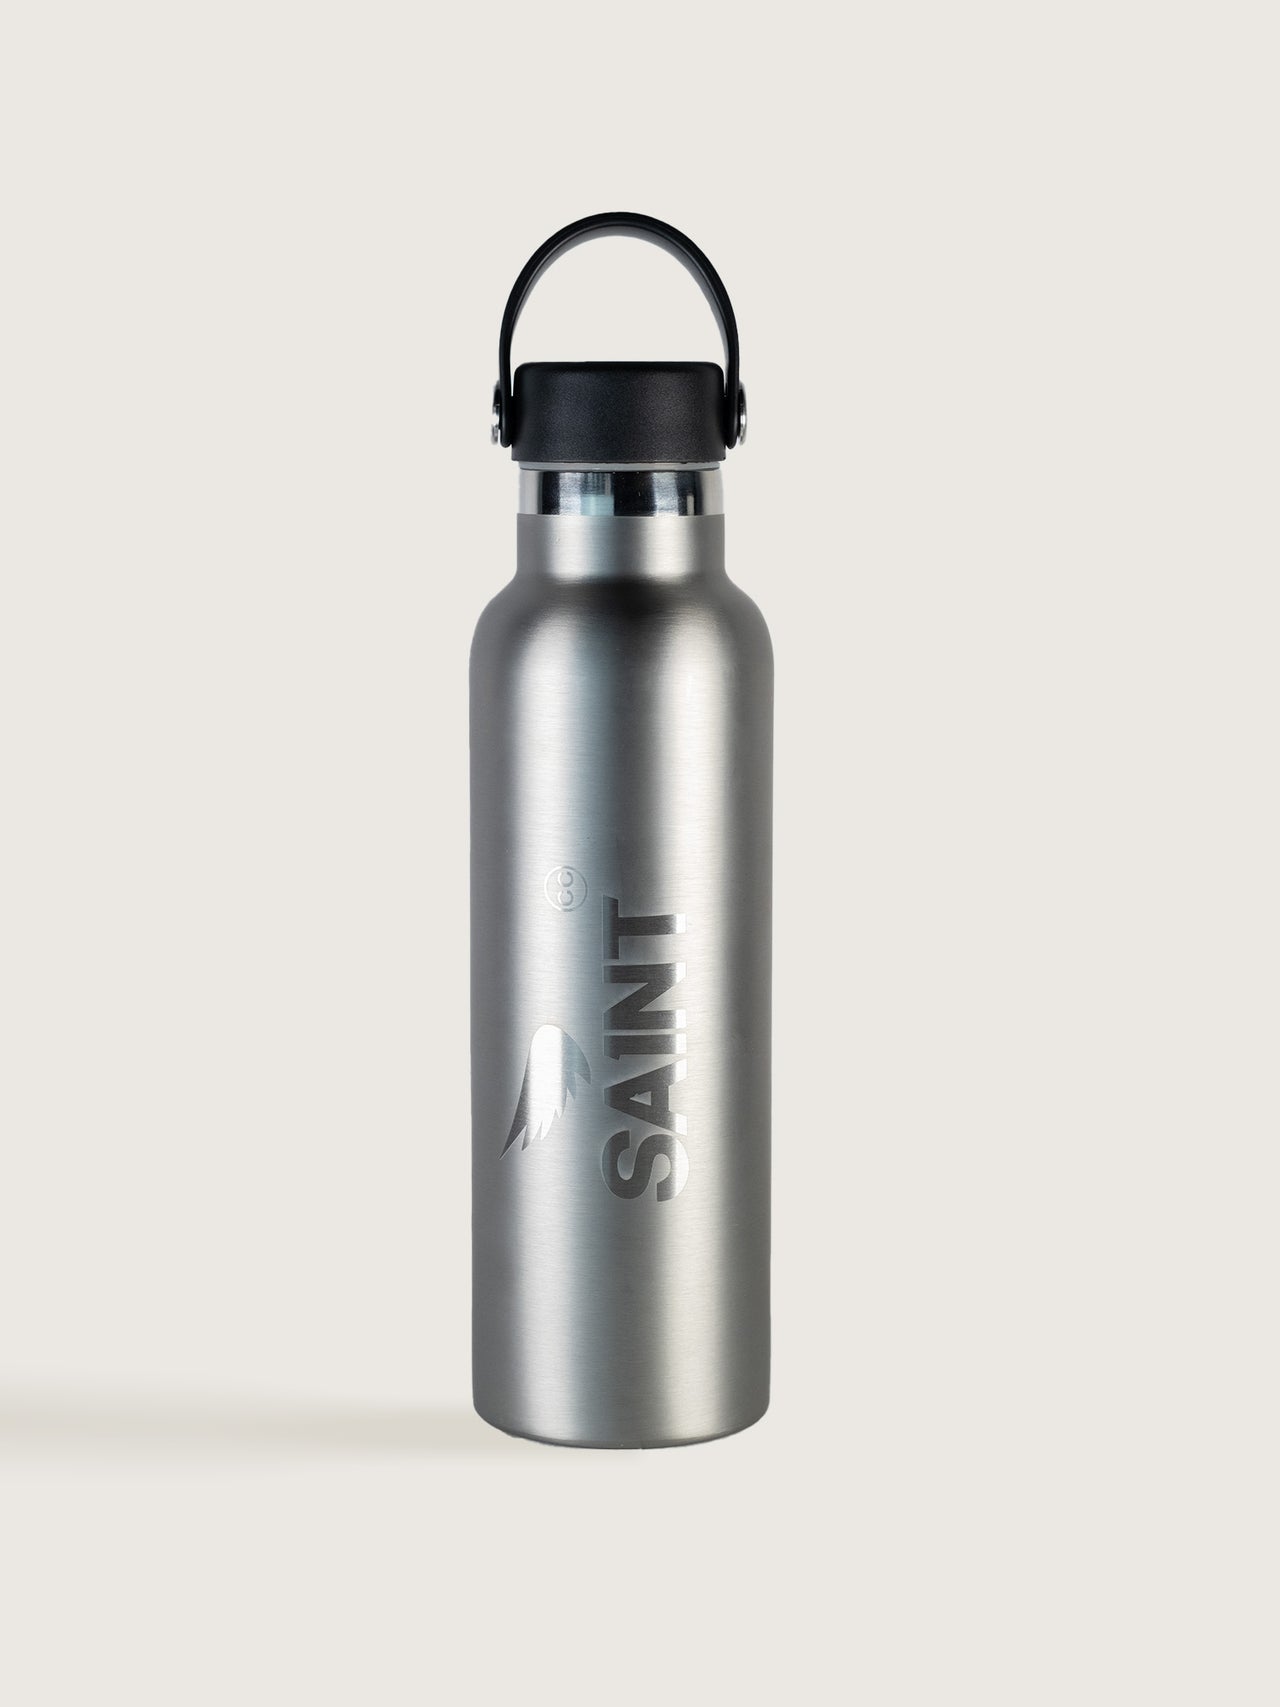 SA1NT STAINLESS STEEL BOTTLE - 750ml - SILVER